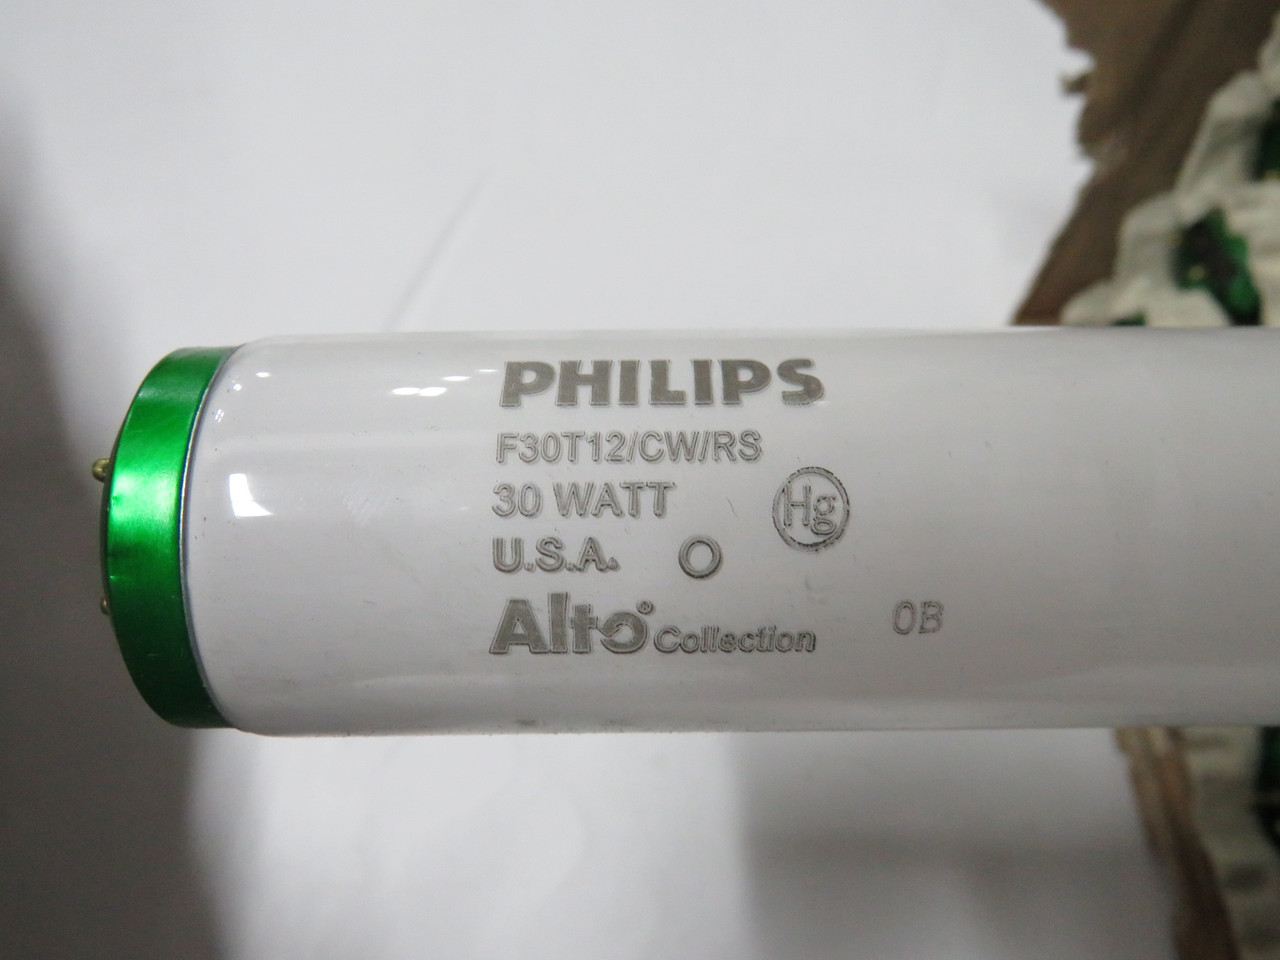 Philips F30T12/CW/RS Fluorescent Lamp 36" 30W LOT of 28 ! NEW !